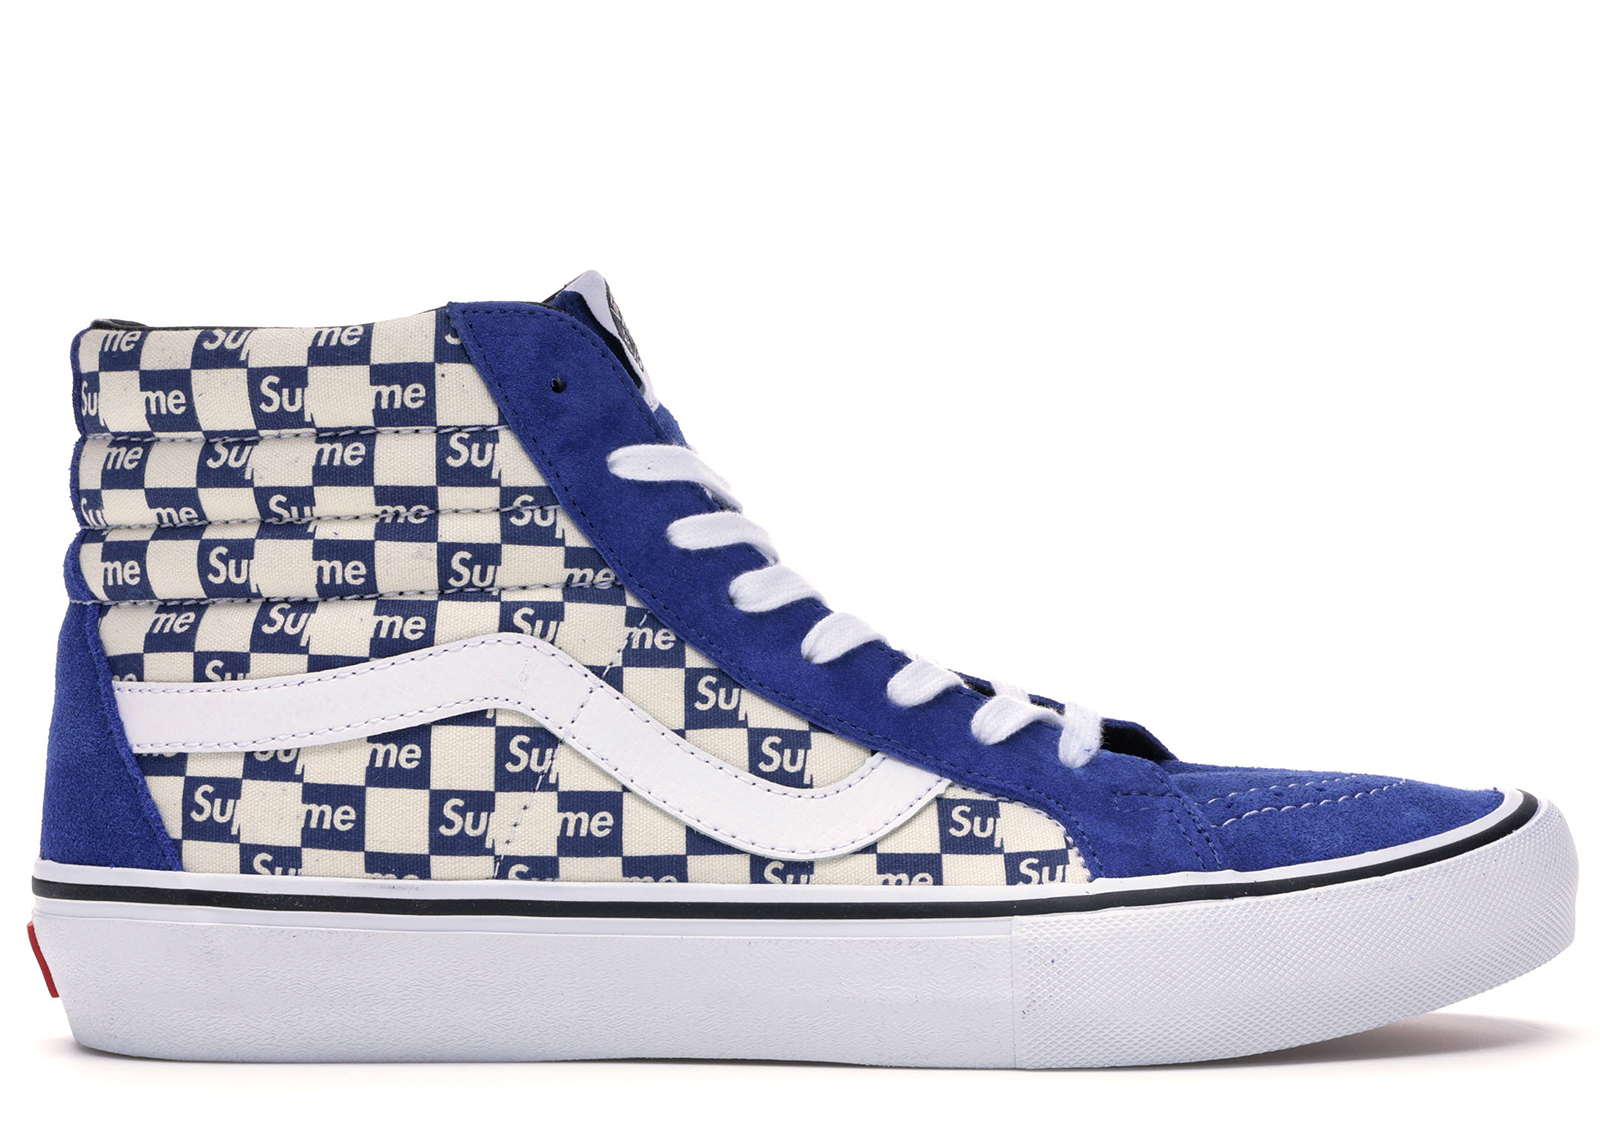 blue and white vans high top